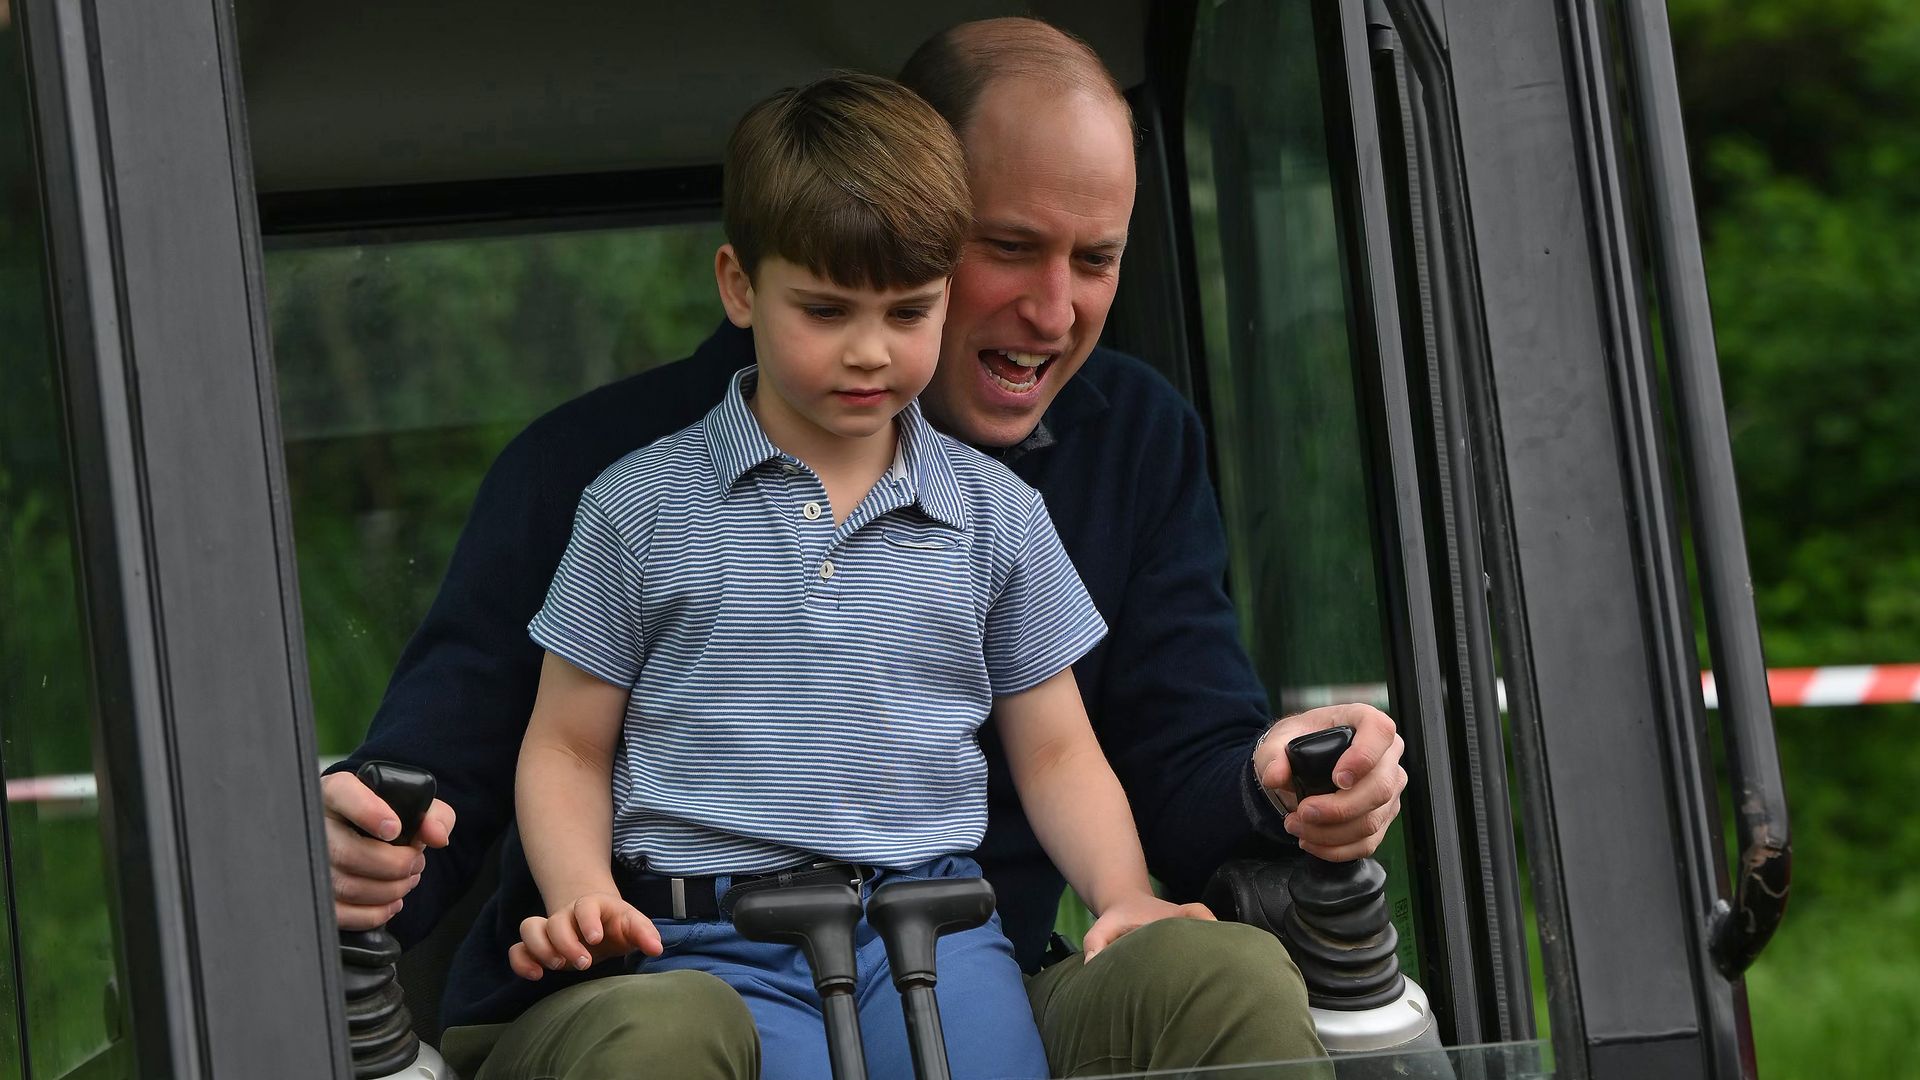 Prince William and Prince louis excavating in a digger